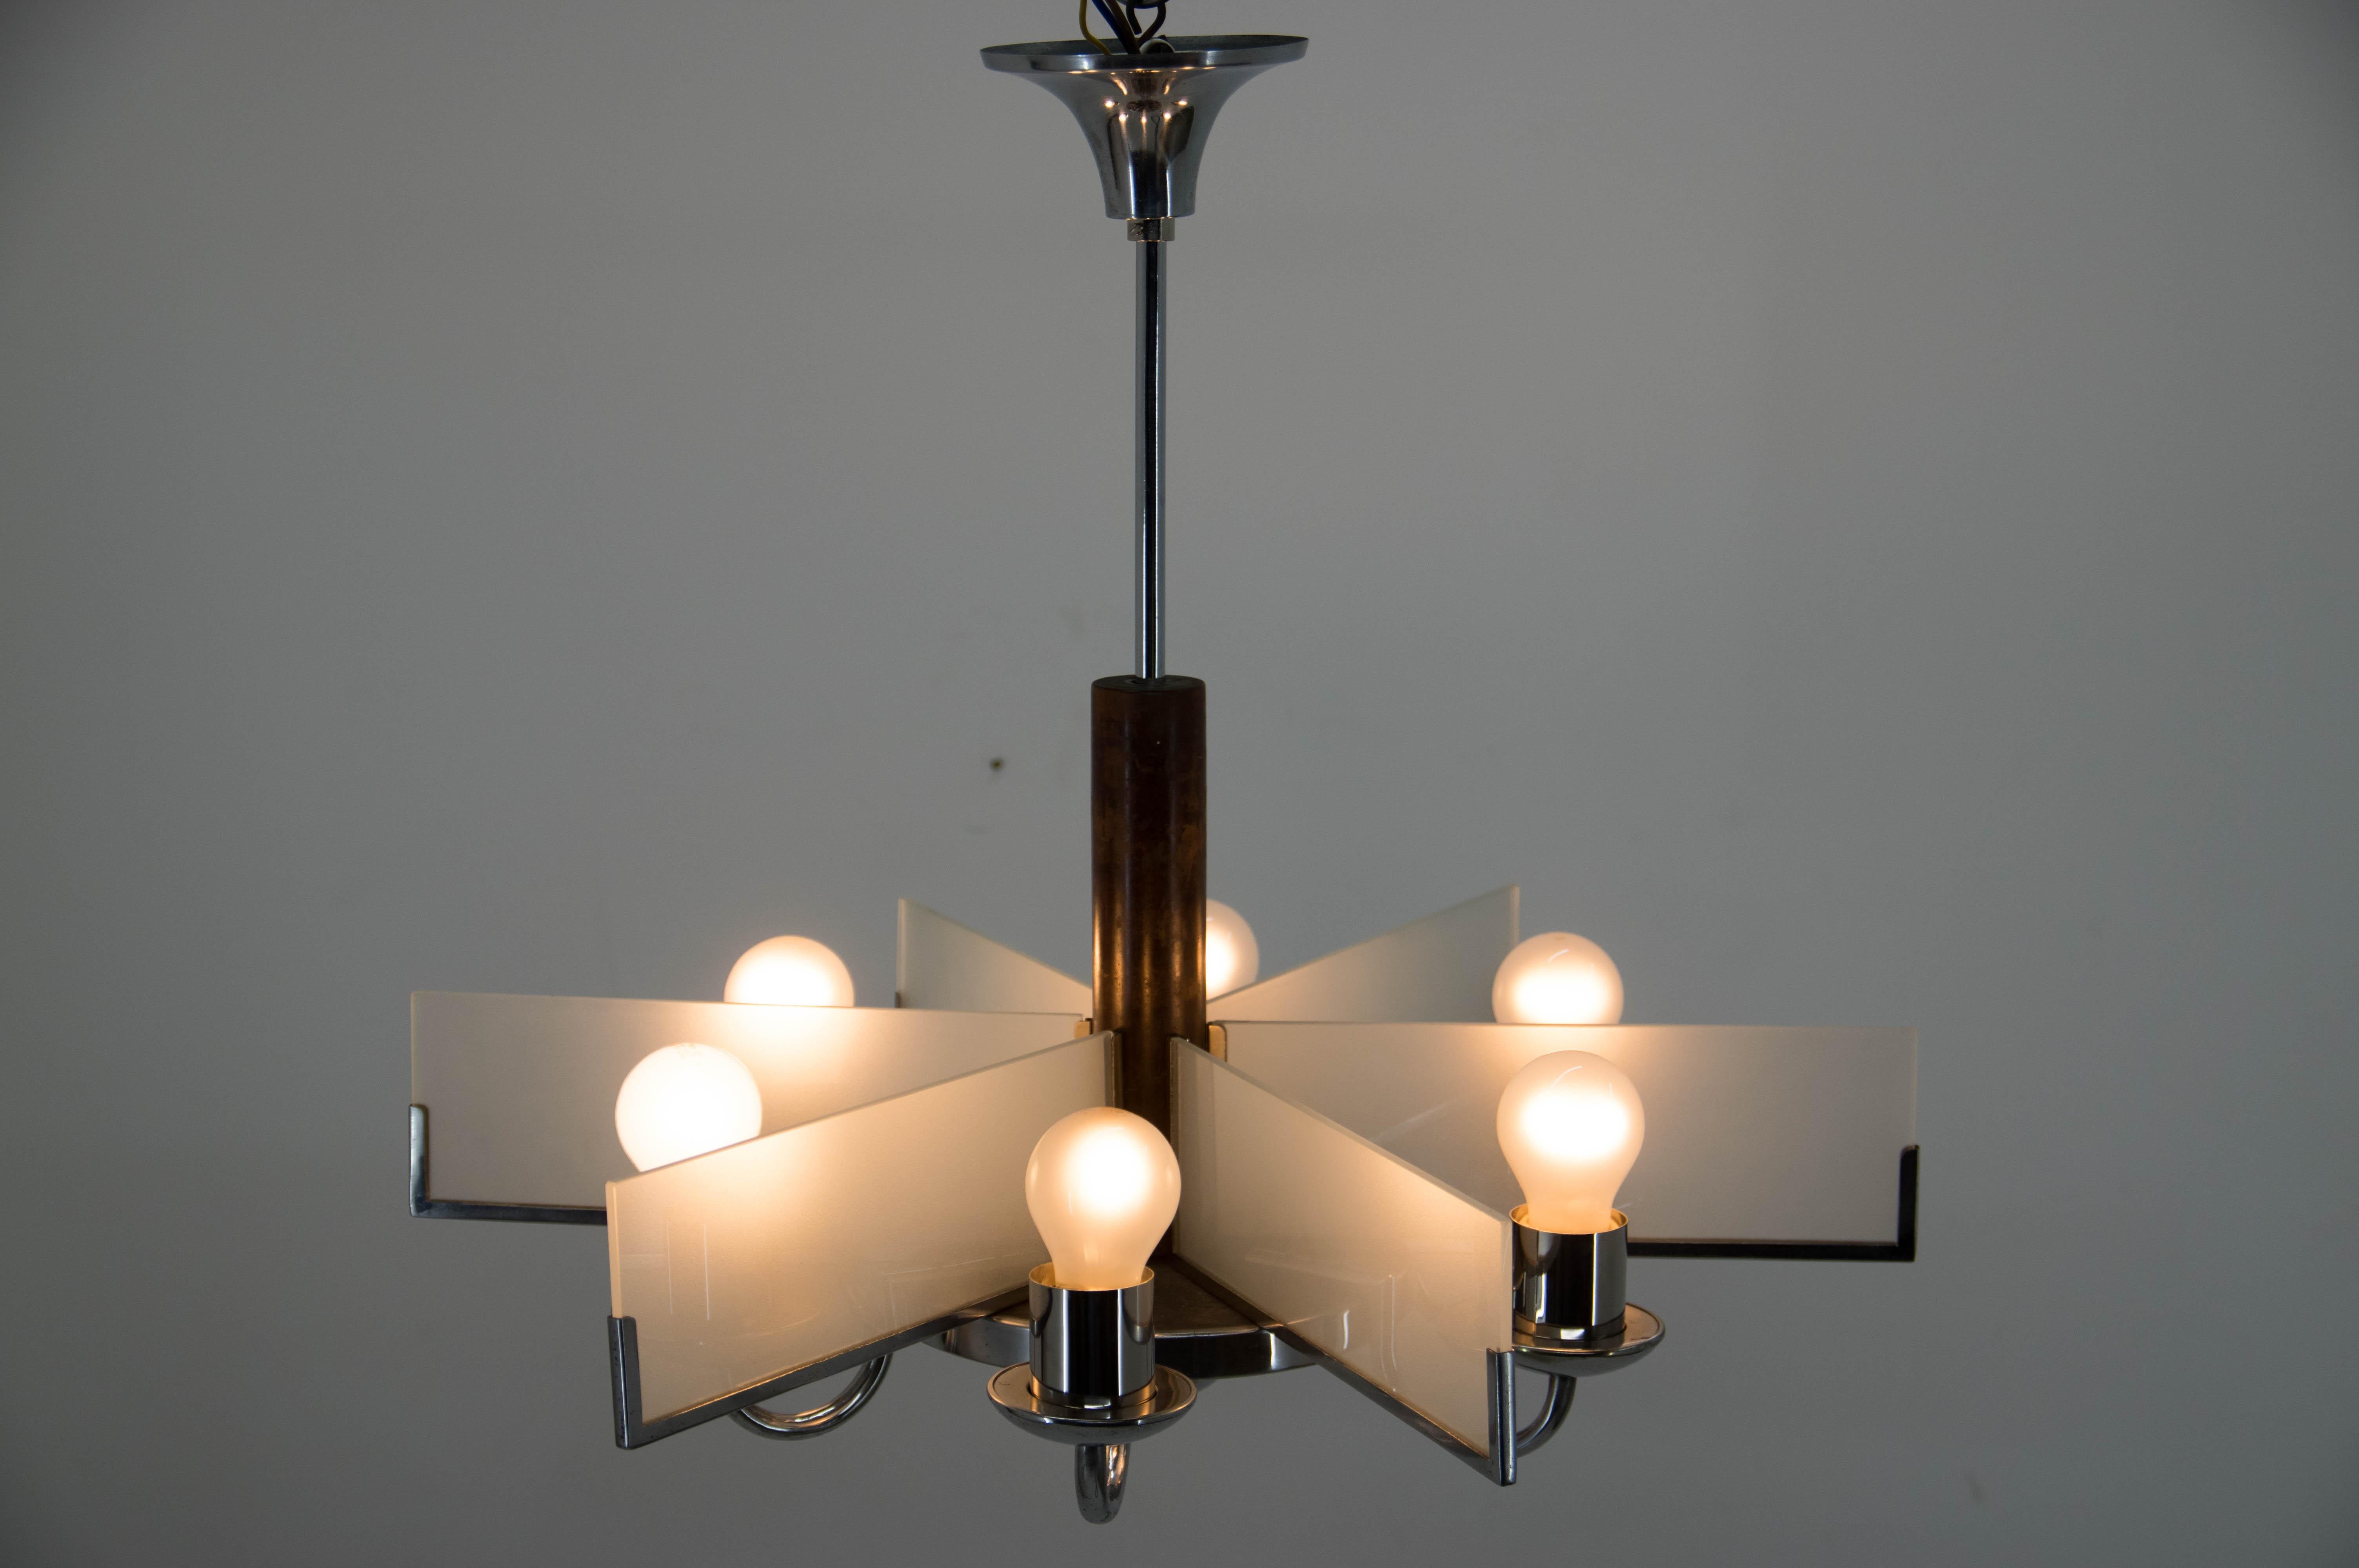 Art Deco Chandelier Made of Chrome, Wood and Sandblasted Glass, 1940s For Sale 4